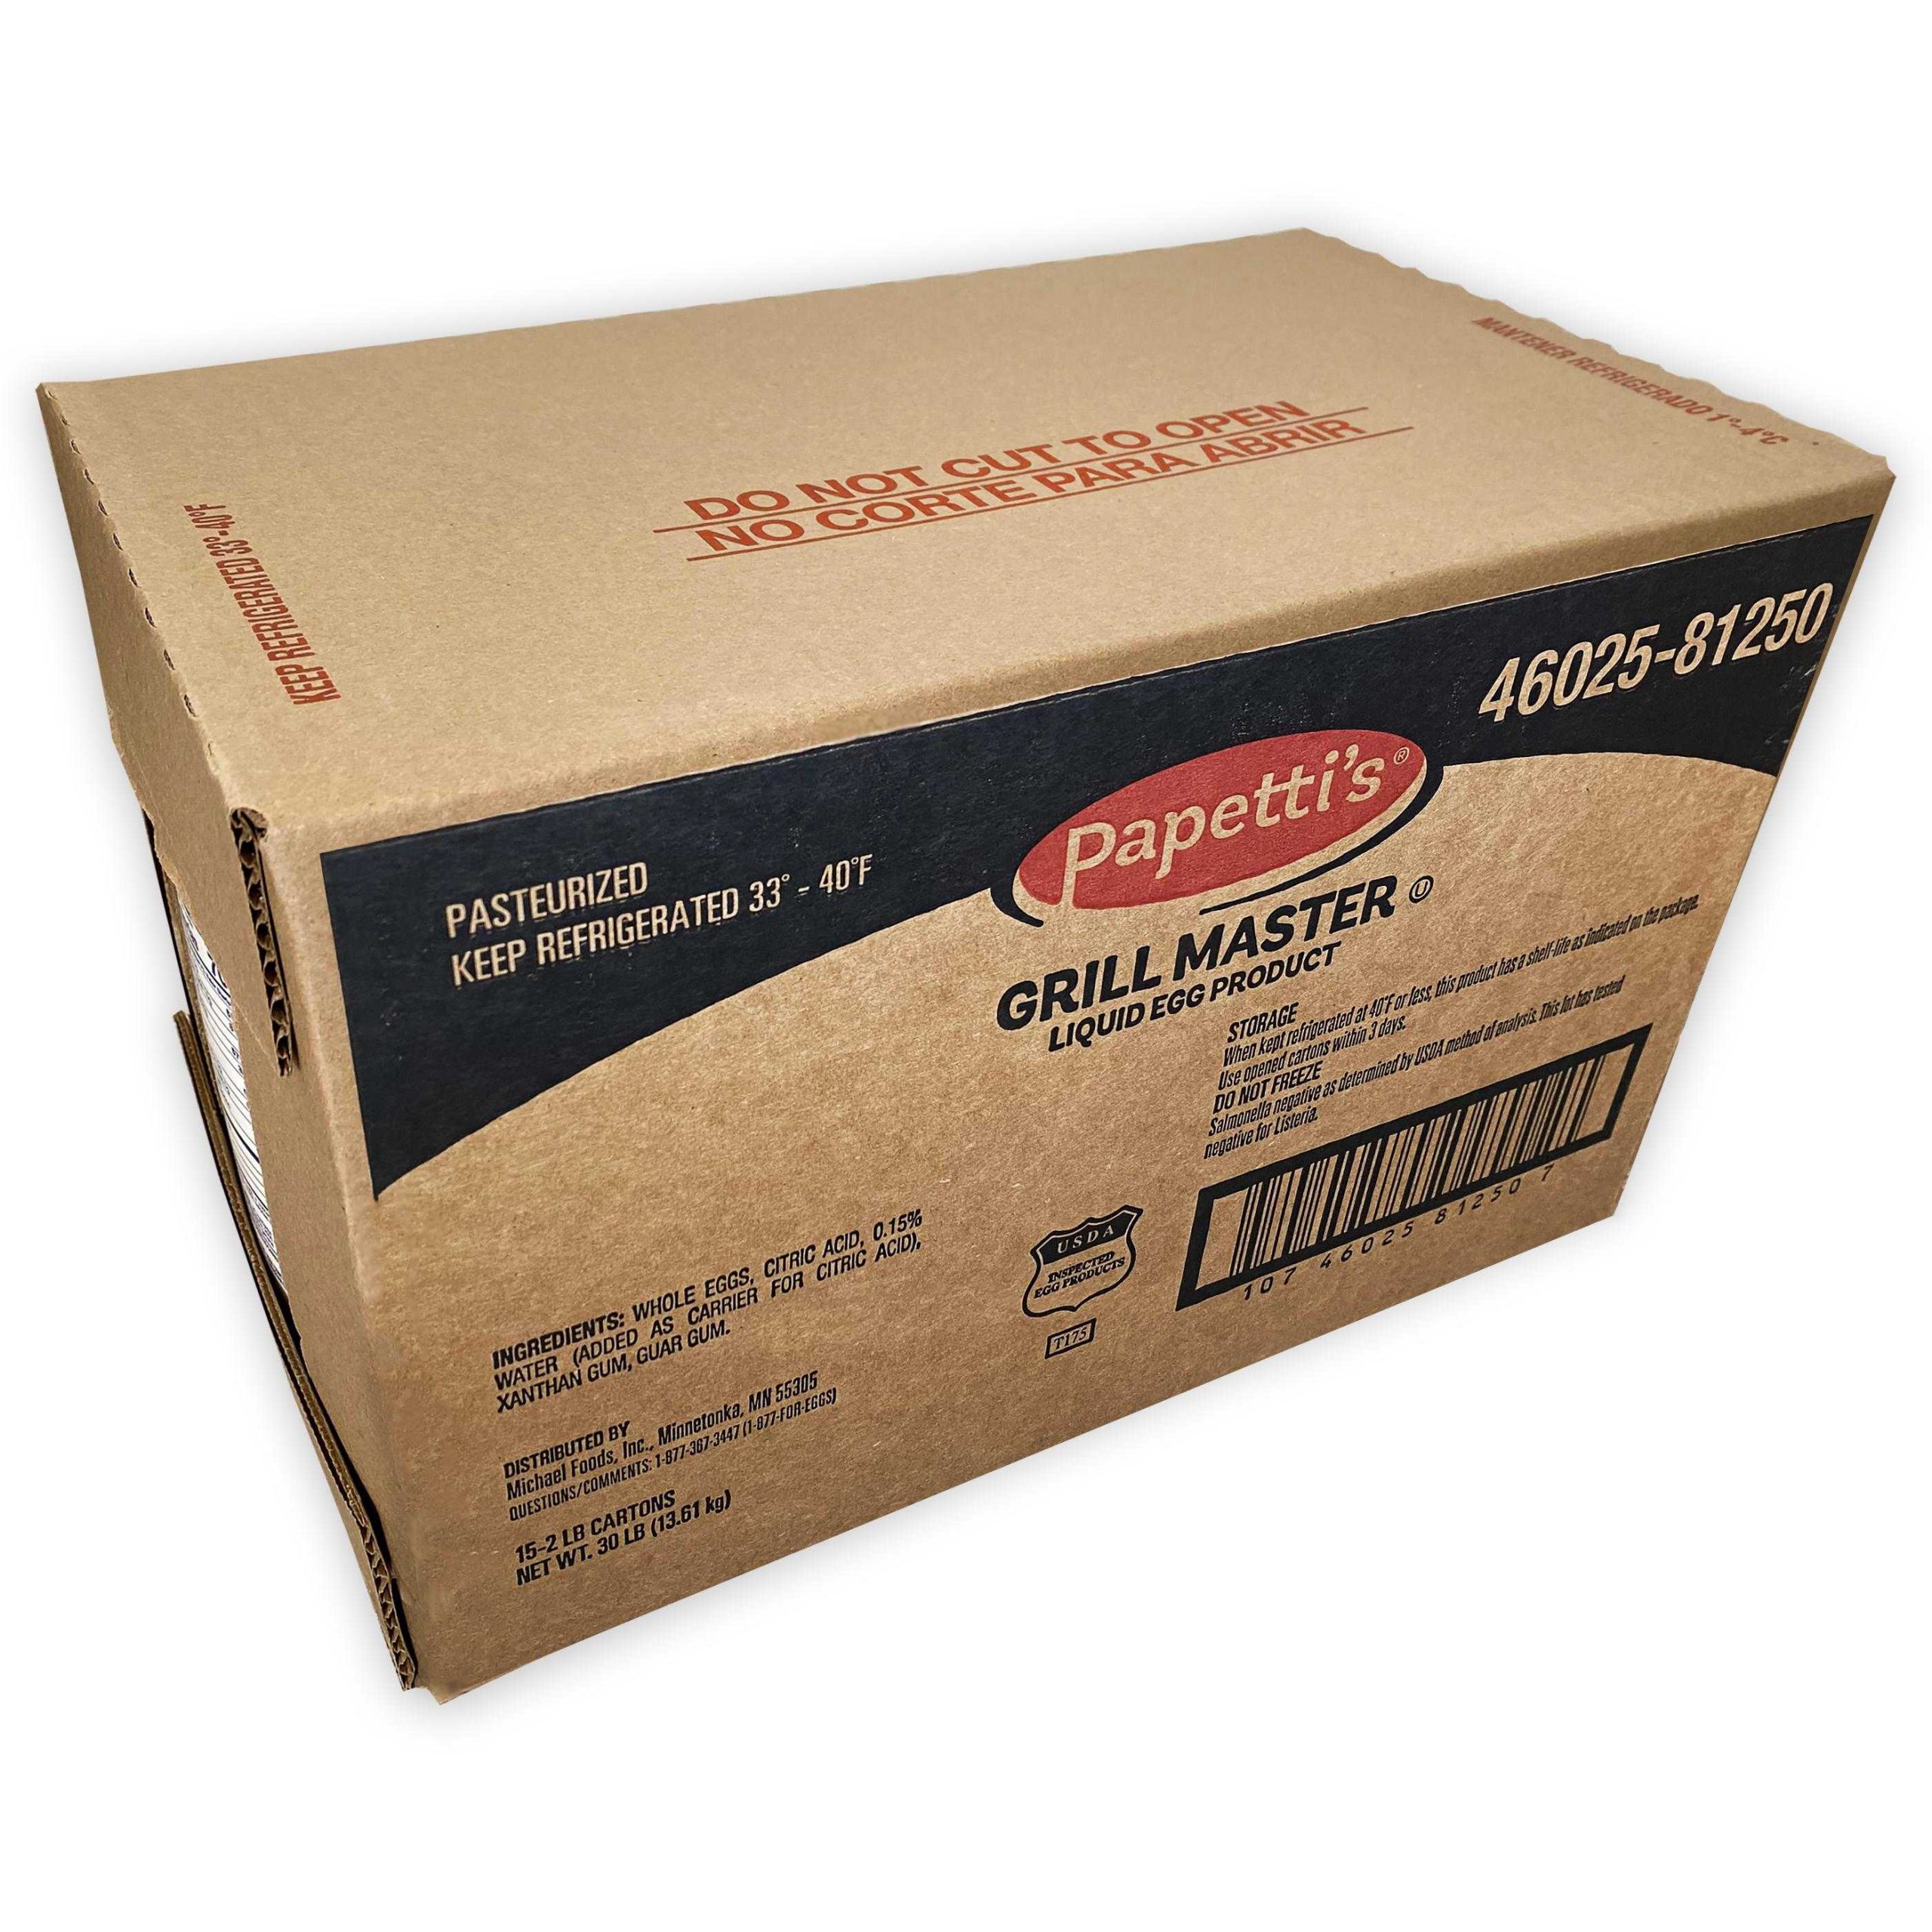 Papetti’s® Grill Master Refrigerated Liquid Egg Product, 15/2 Lb Cartons